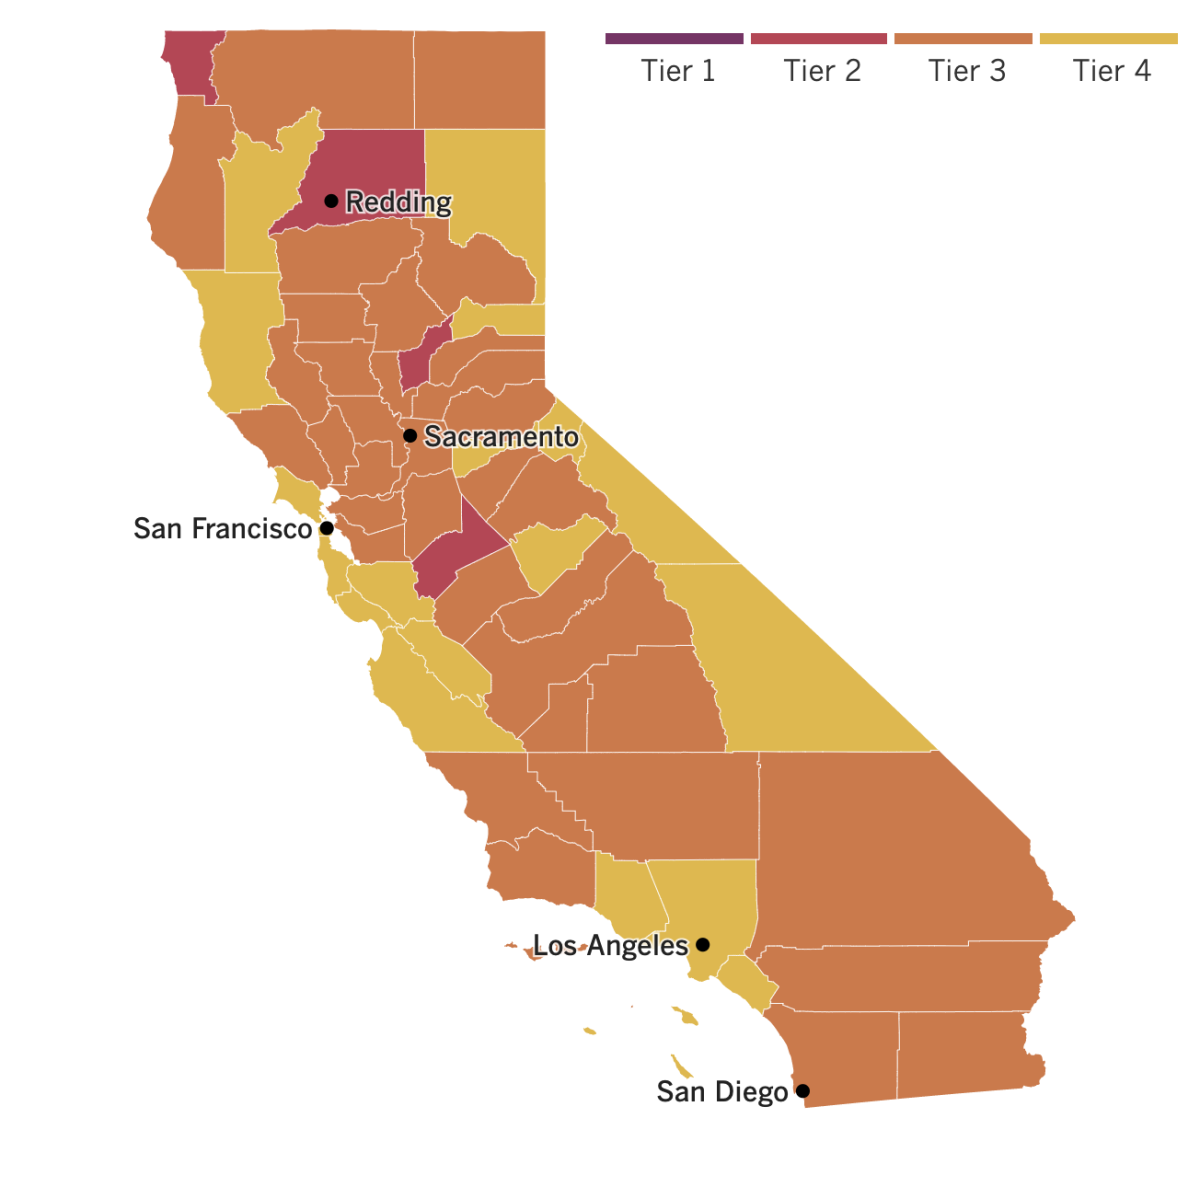 California reopening map: four counties in the red tier, 35 orange and 19 yellow.